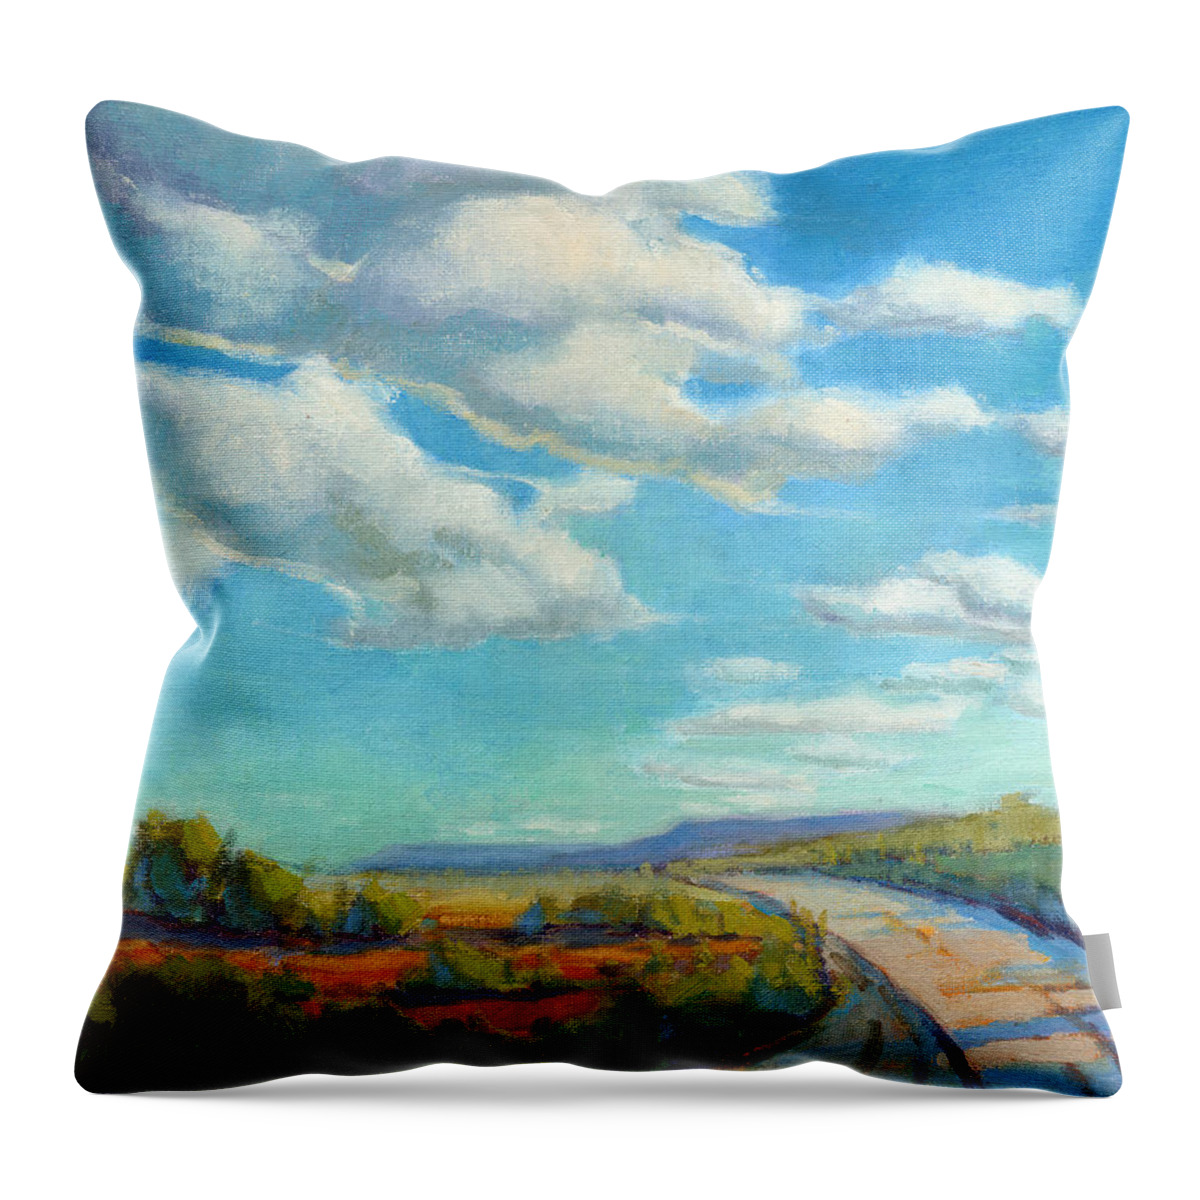 New Mexico Throw Pillow featuring the painting Road Trip 2 by Konnie Kim